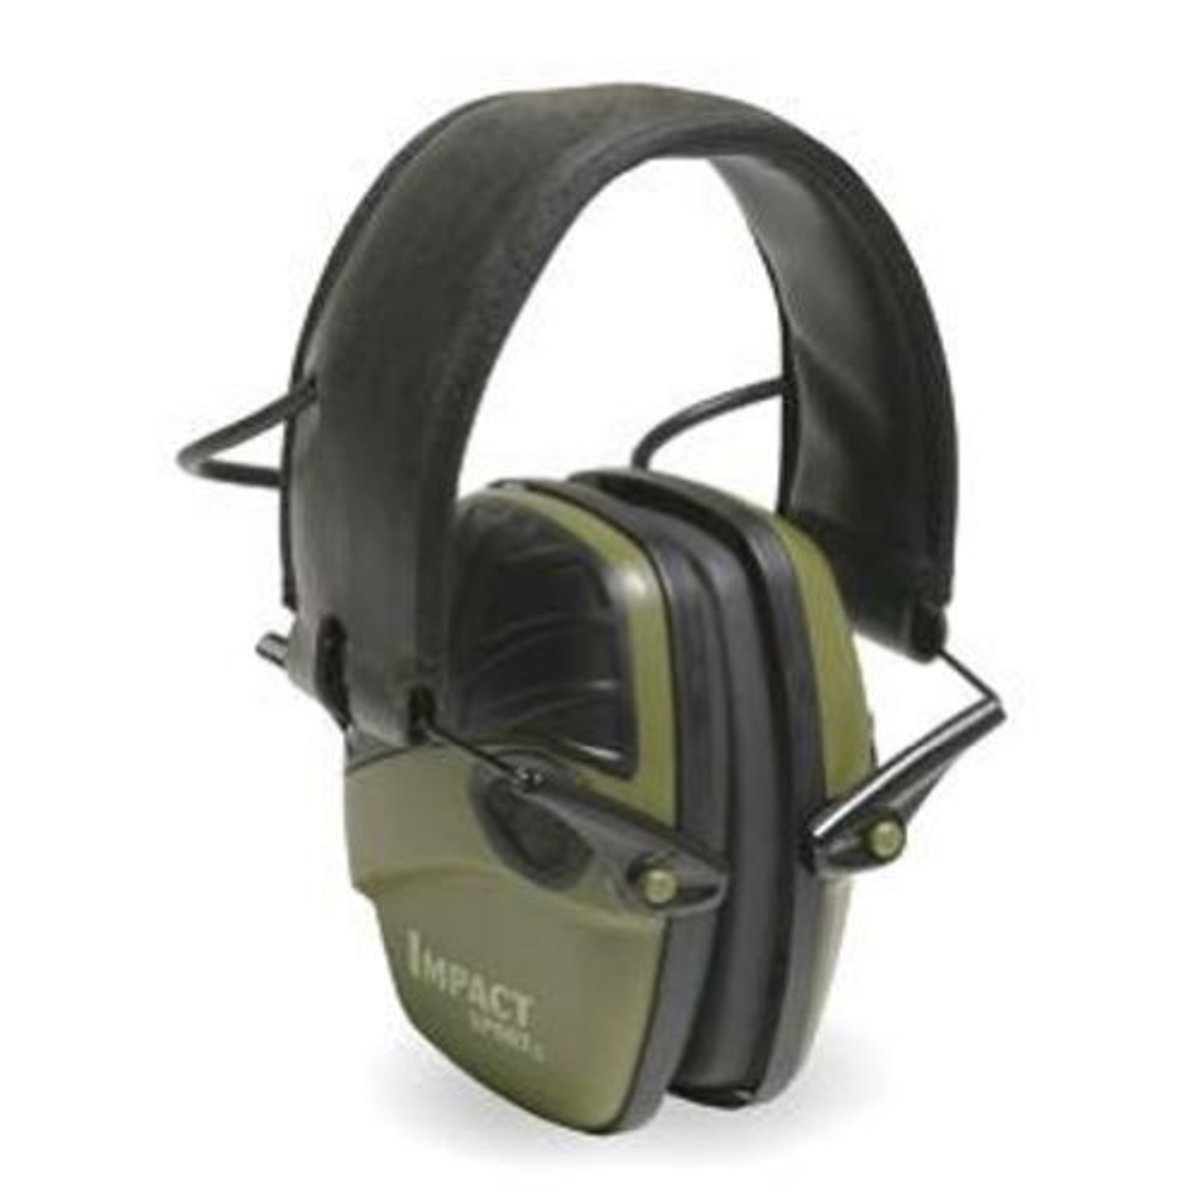 best-noise-canceling-headphones-the-howard-leight-r-01526-impact-sport-electronic-earmuff-review